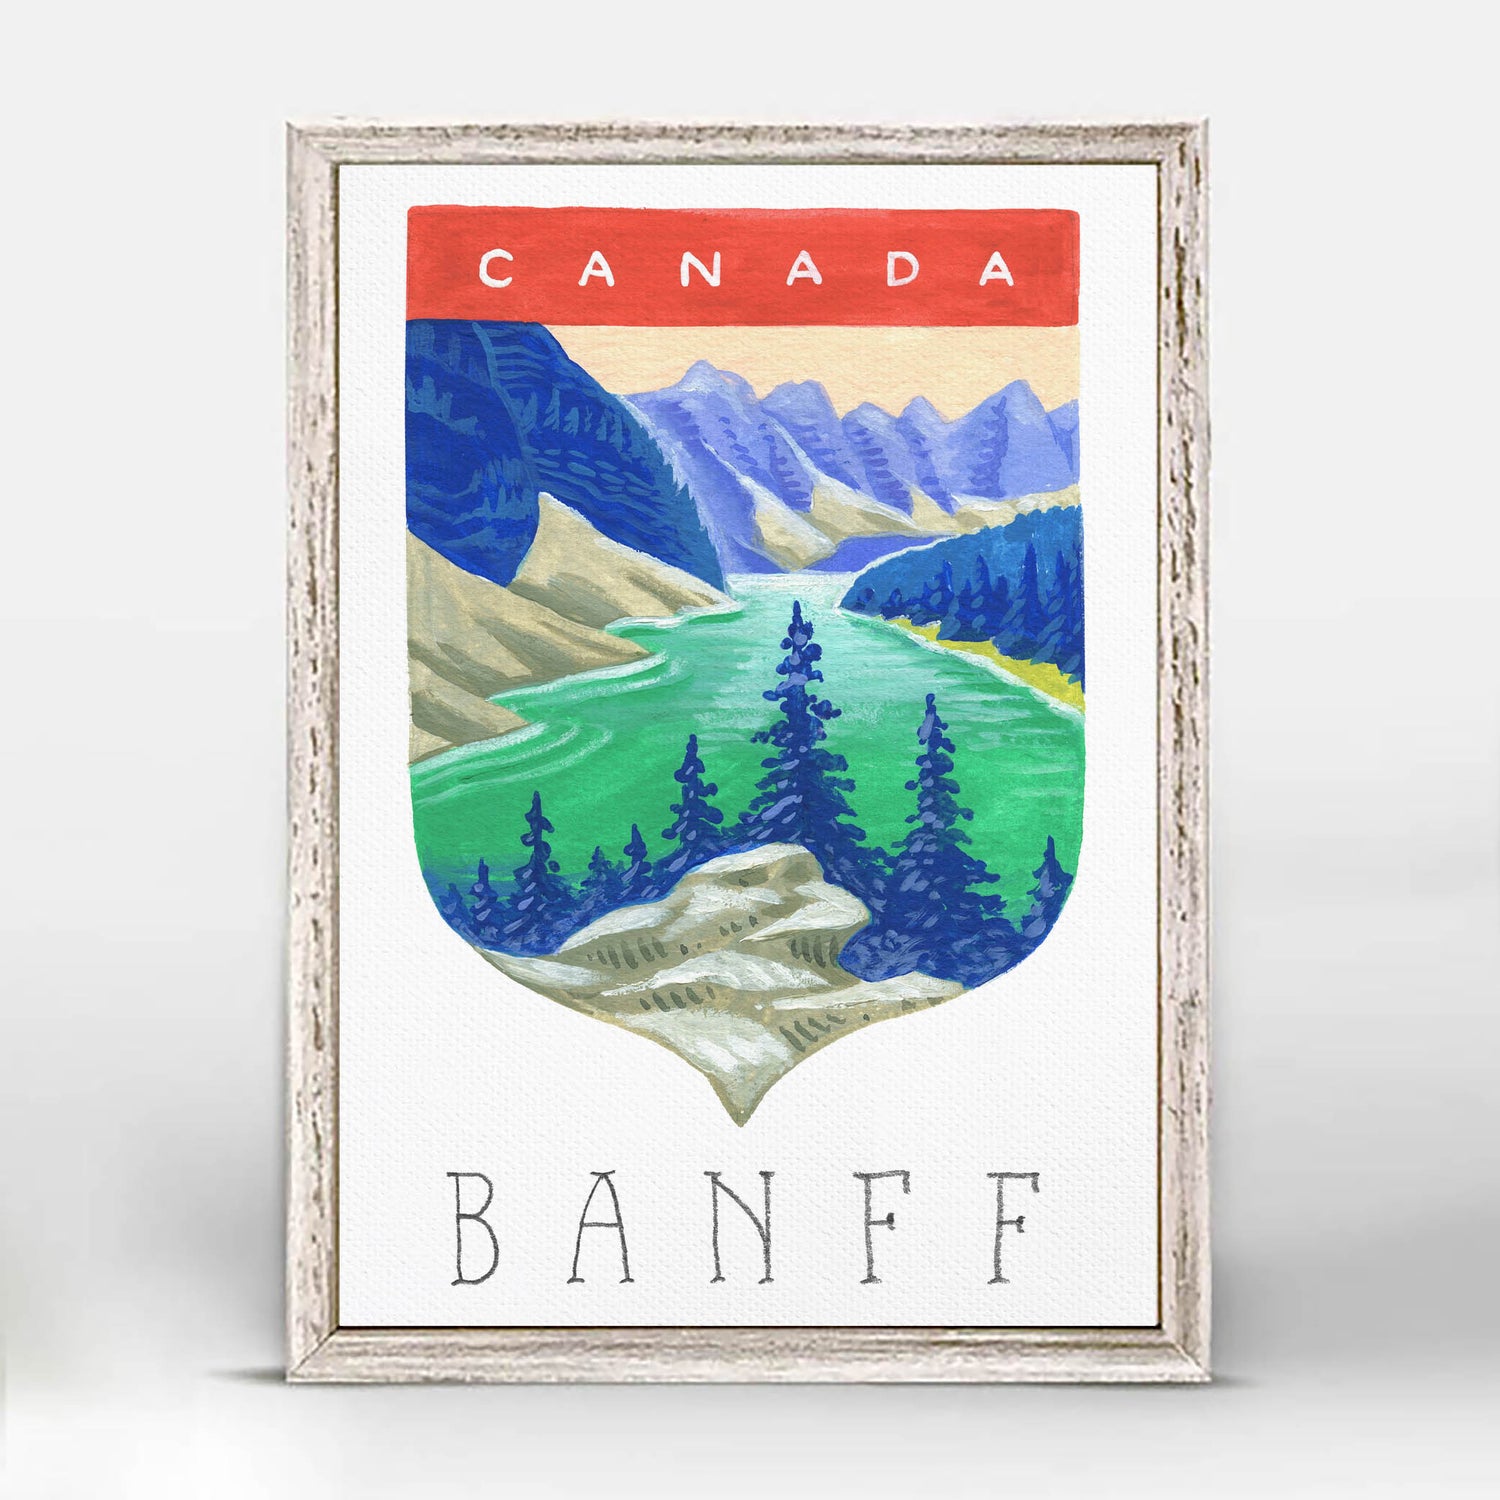 Banff National Park art with Rocky Mountains, glacial lakes, and coniferous forest; trendy illustration by Angela Staehling